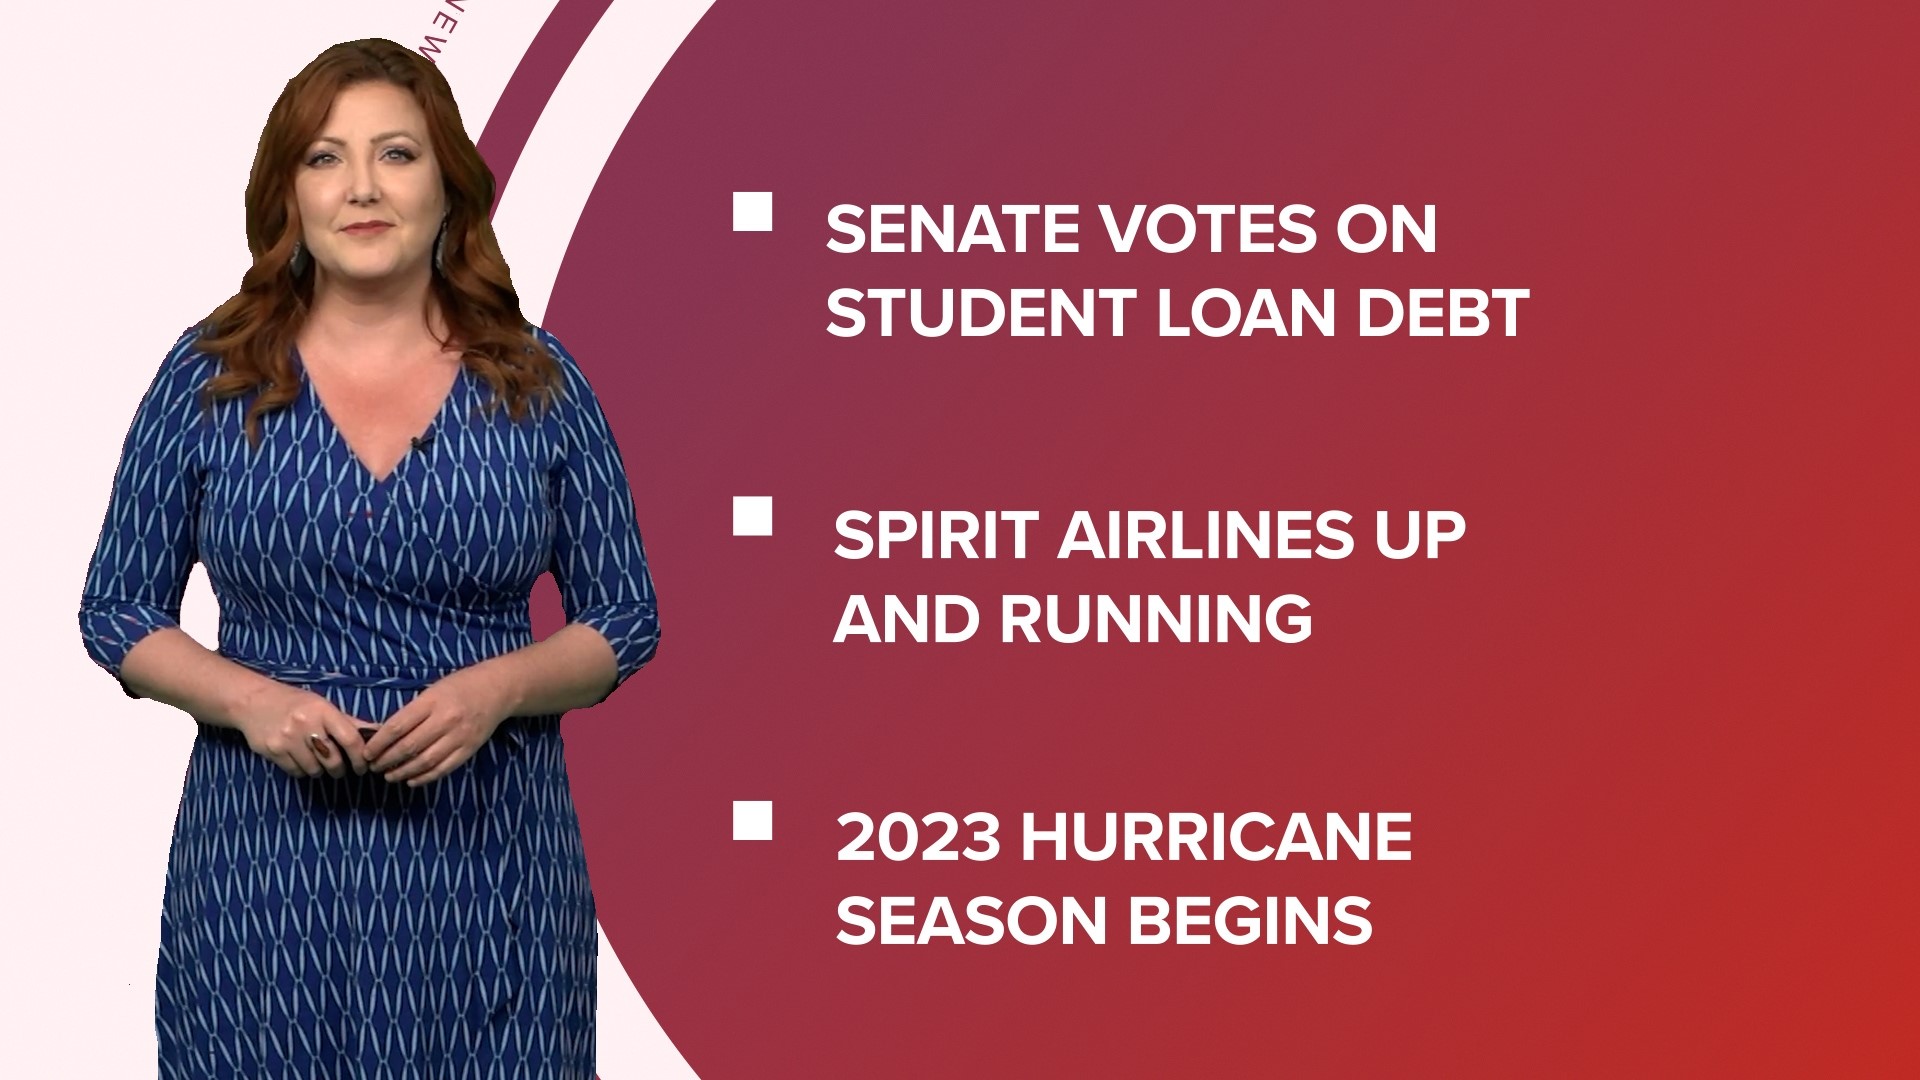 A look at what is happening in the news from the latest on student loan payments to preparing for the 2023 hurricane season and a new Barbie doll collection.